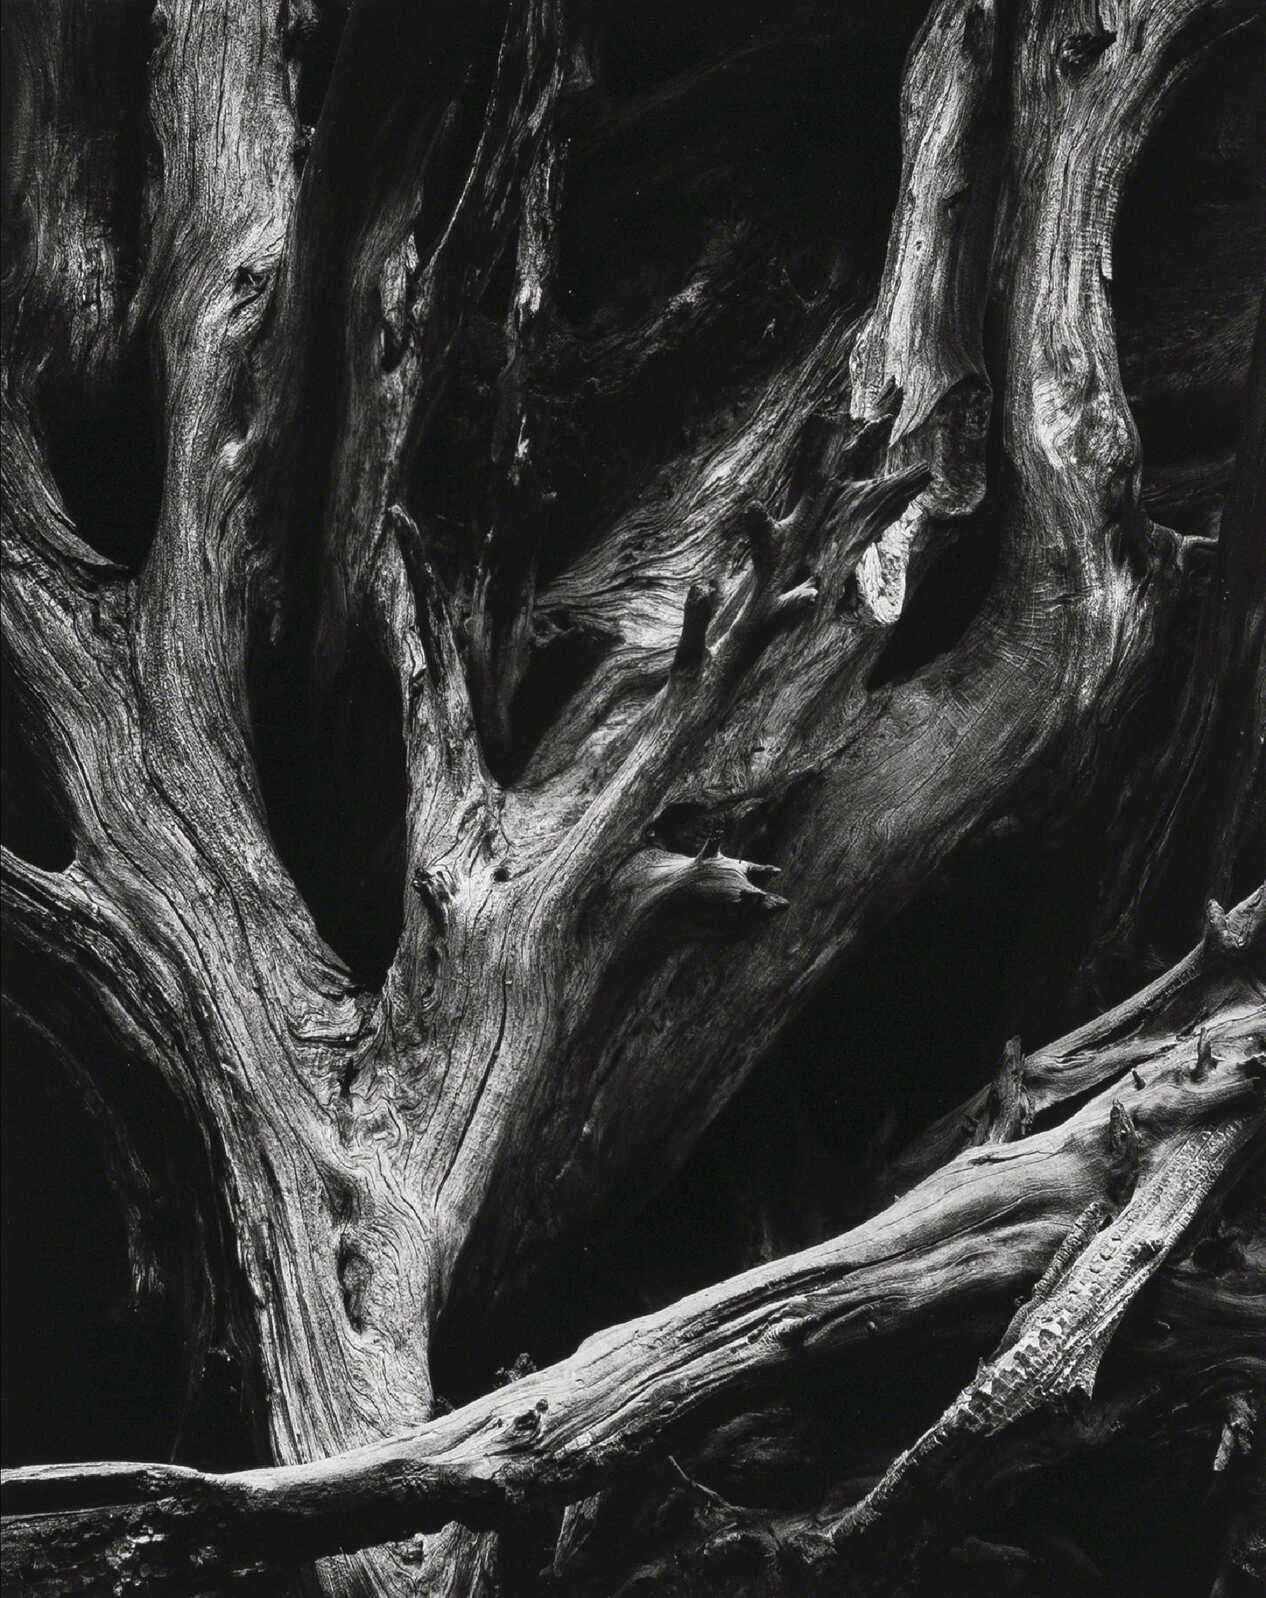 Ansel Adams Black and White Photograph - Sequoia roots, Mariposa Grove, Yosemite National Park, California, 1950 (from Po